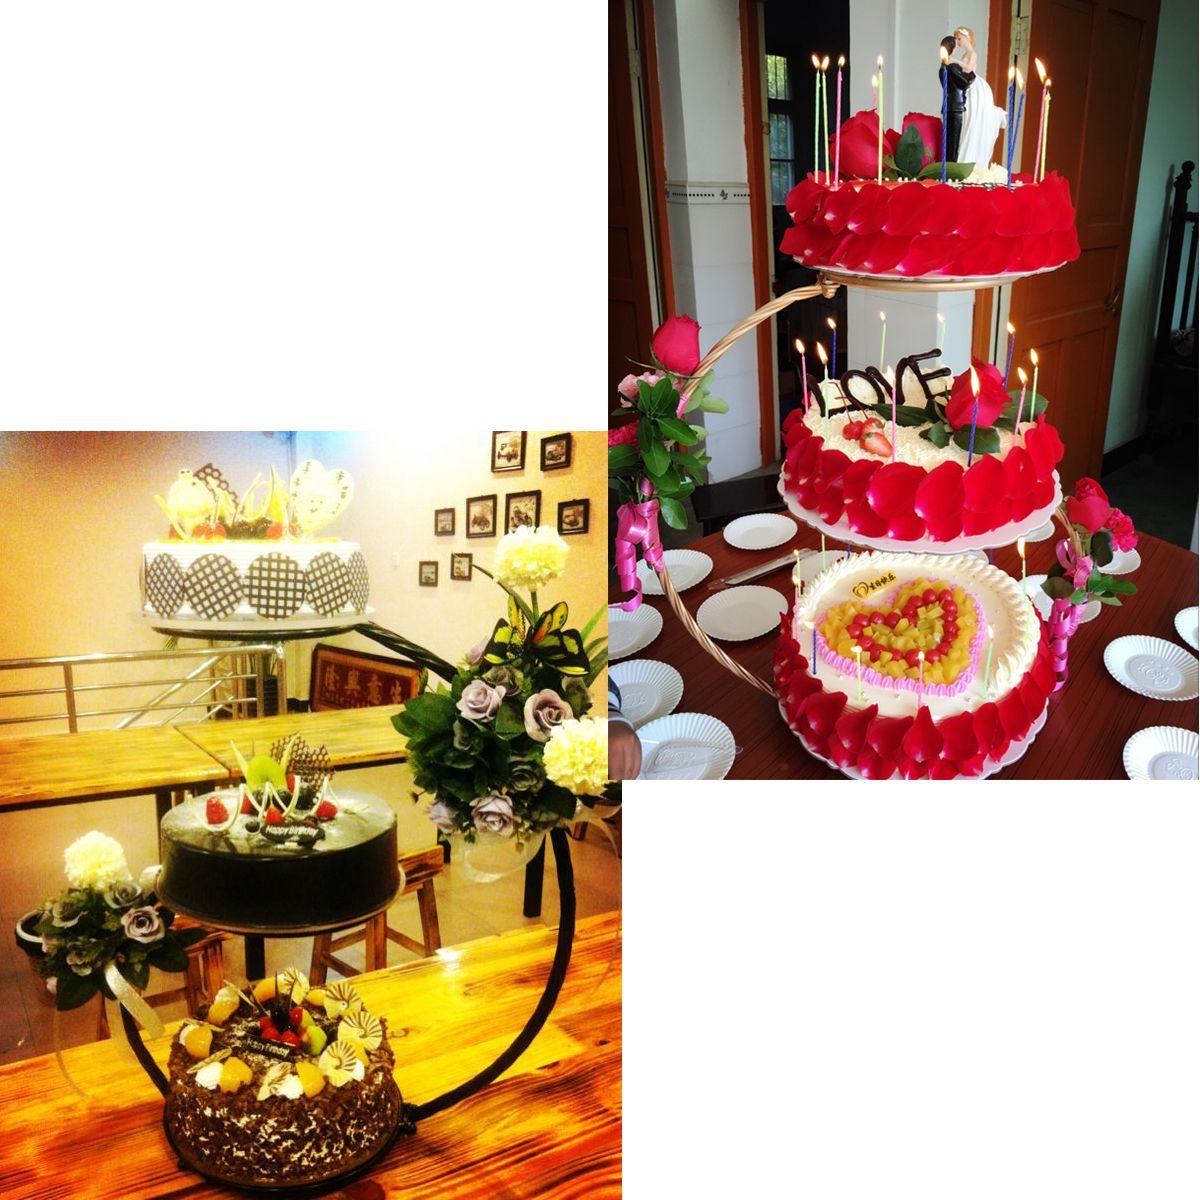 3-Tier-Iron-Cake-Stand-60cm-Height-Wedding-Birthday-Party-Display-Decorations-1458924